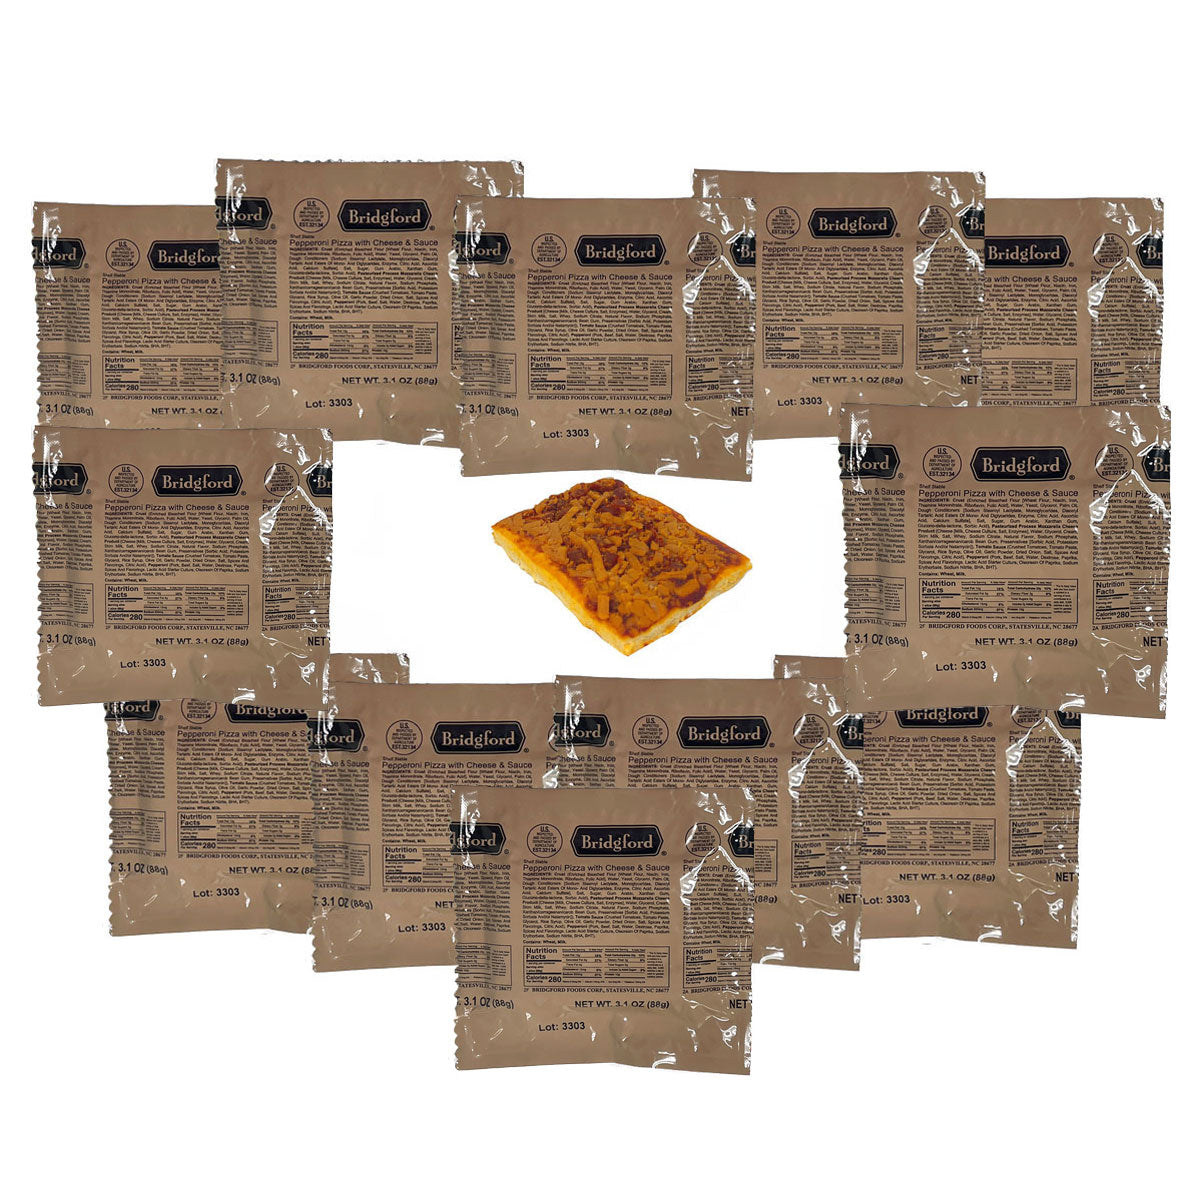 Pepperoni Pizza Slice - MRE Meals Ready to Eat 12 Pack